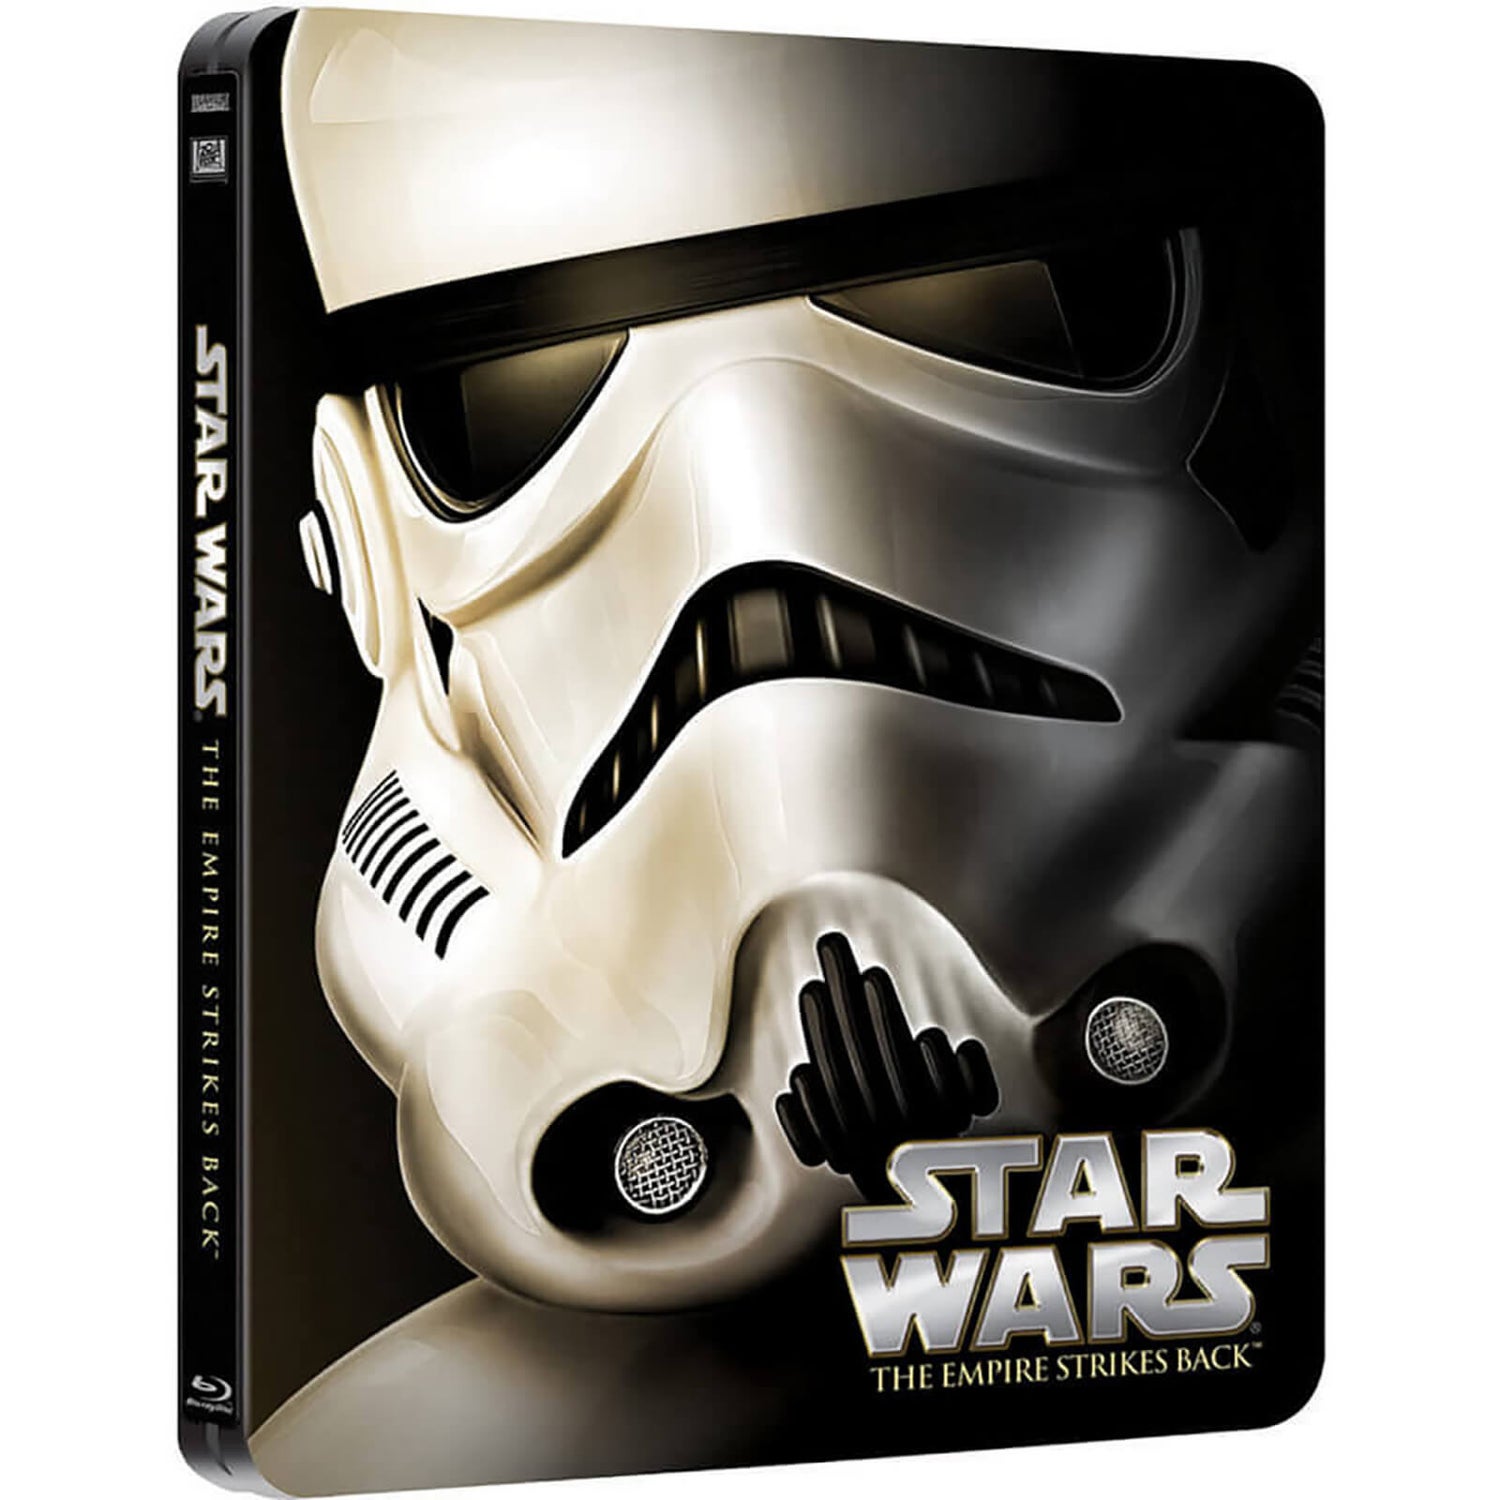 Star Wars Episode V: The Empire Strikes Back - Limited Edition Steelbook (UK EDITION)